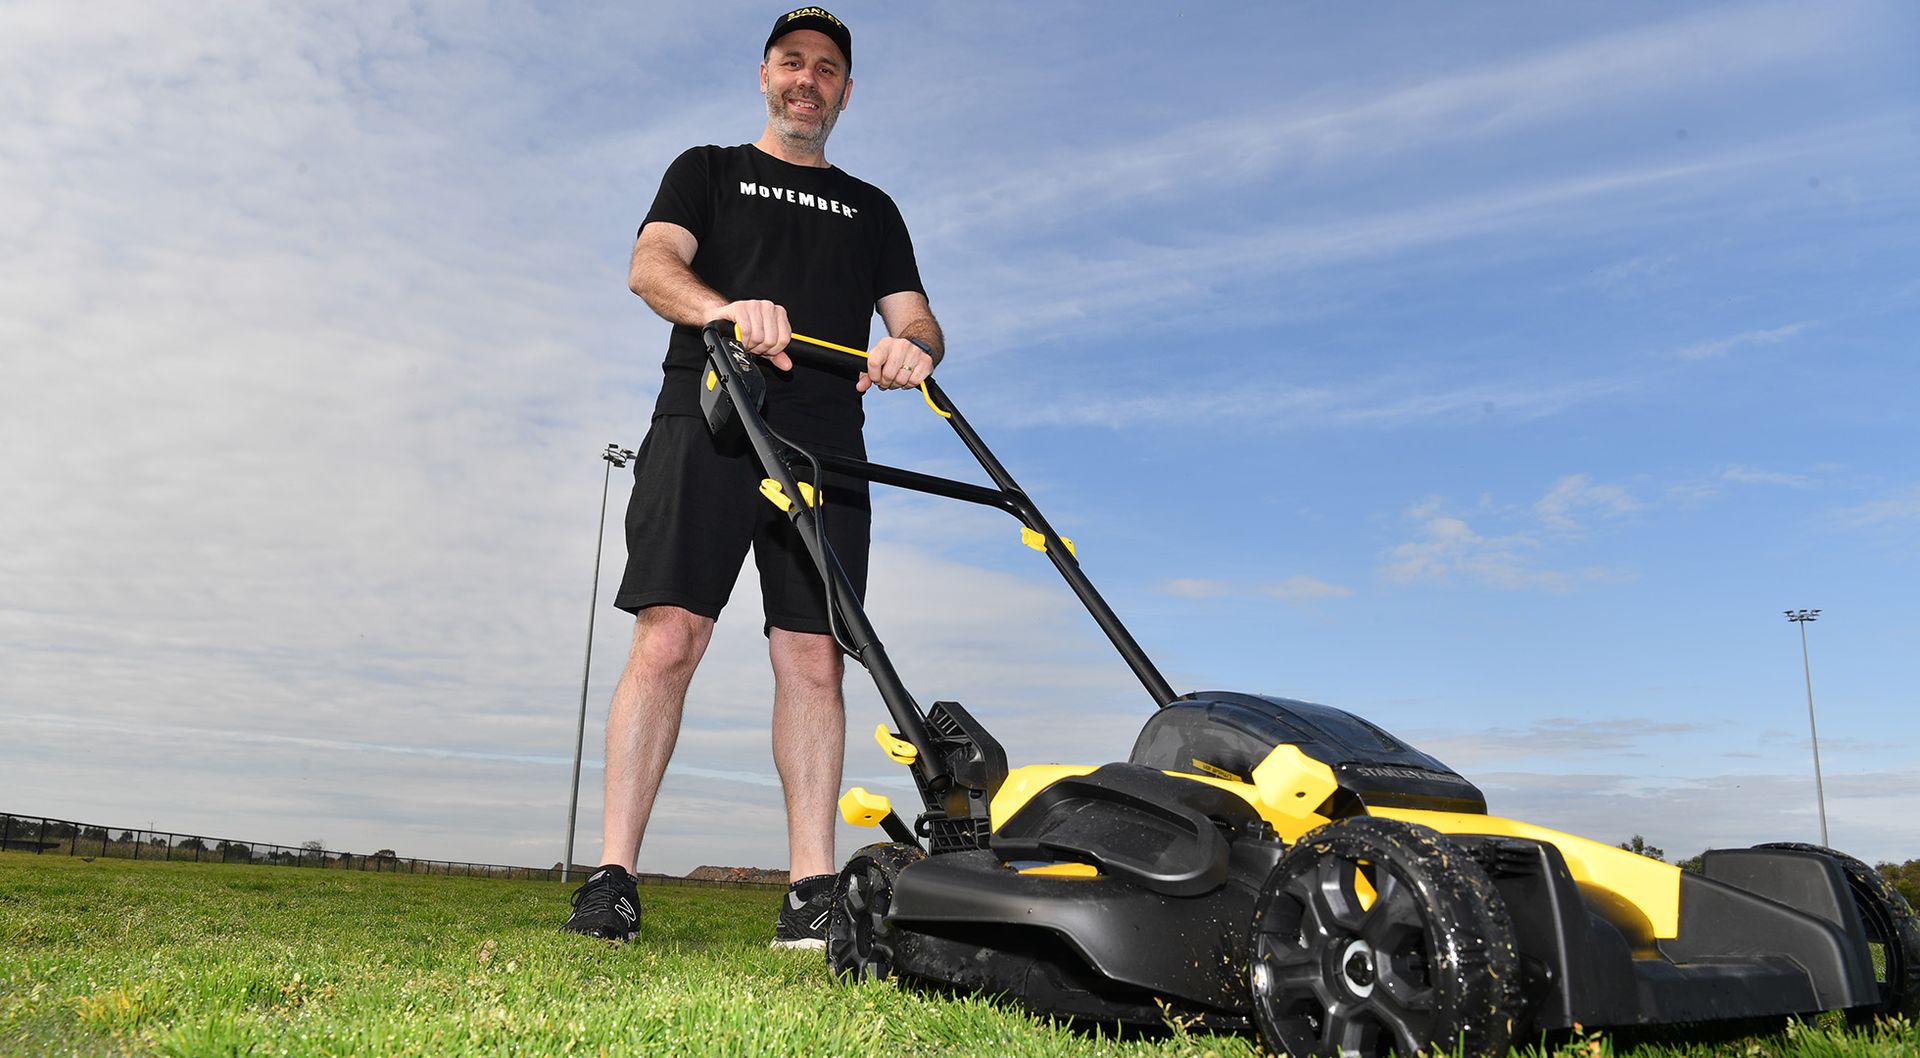 Mo Bro Bradley poses with lawn mower